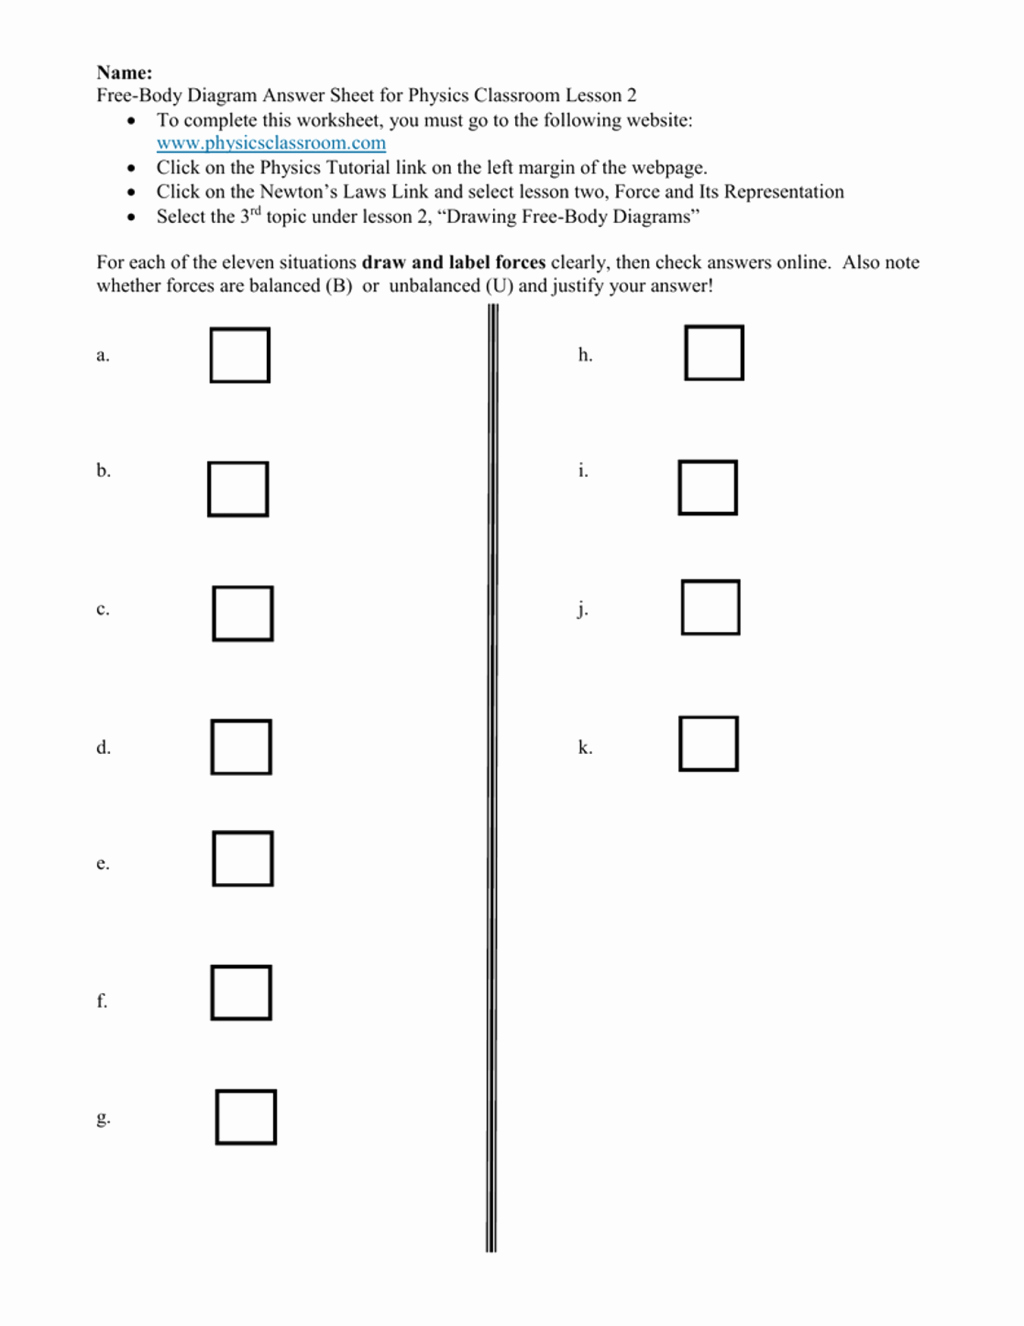 Free Body Diagram Worksheet Answers Unique Drawing Free Body Diagrams Worksheet the Best Worksheets